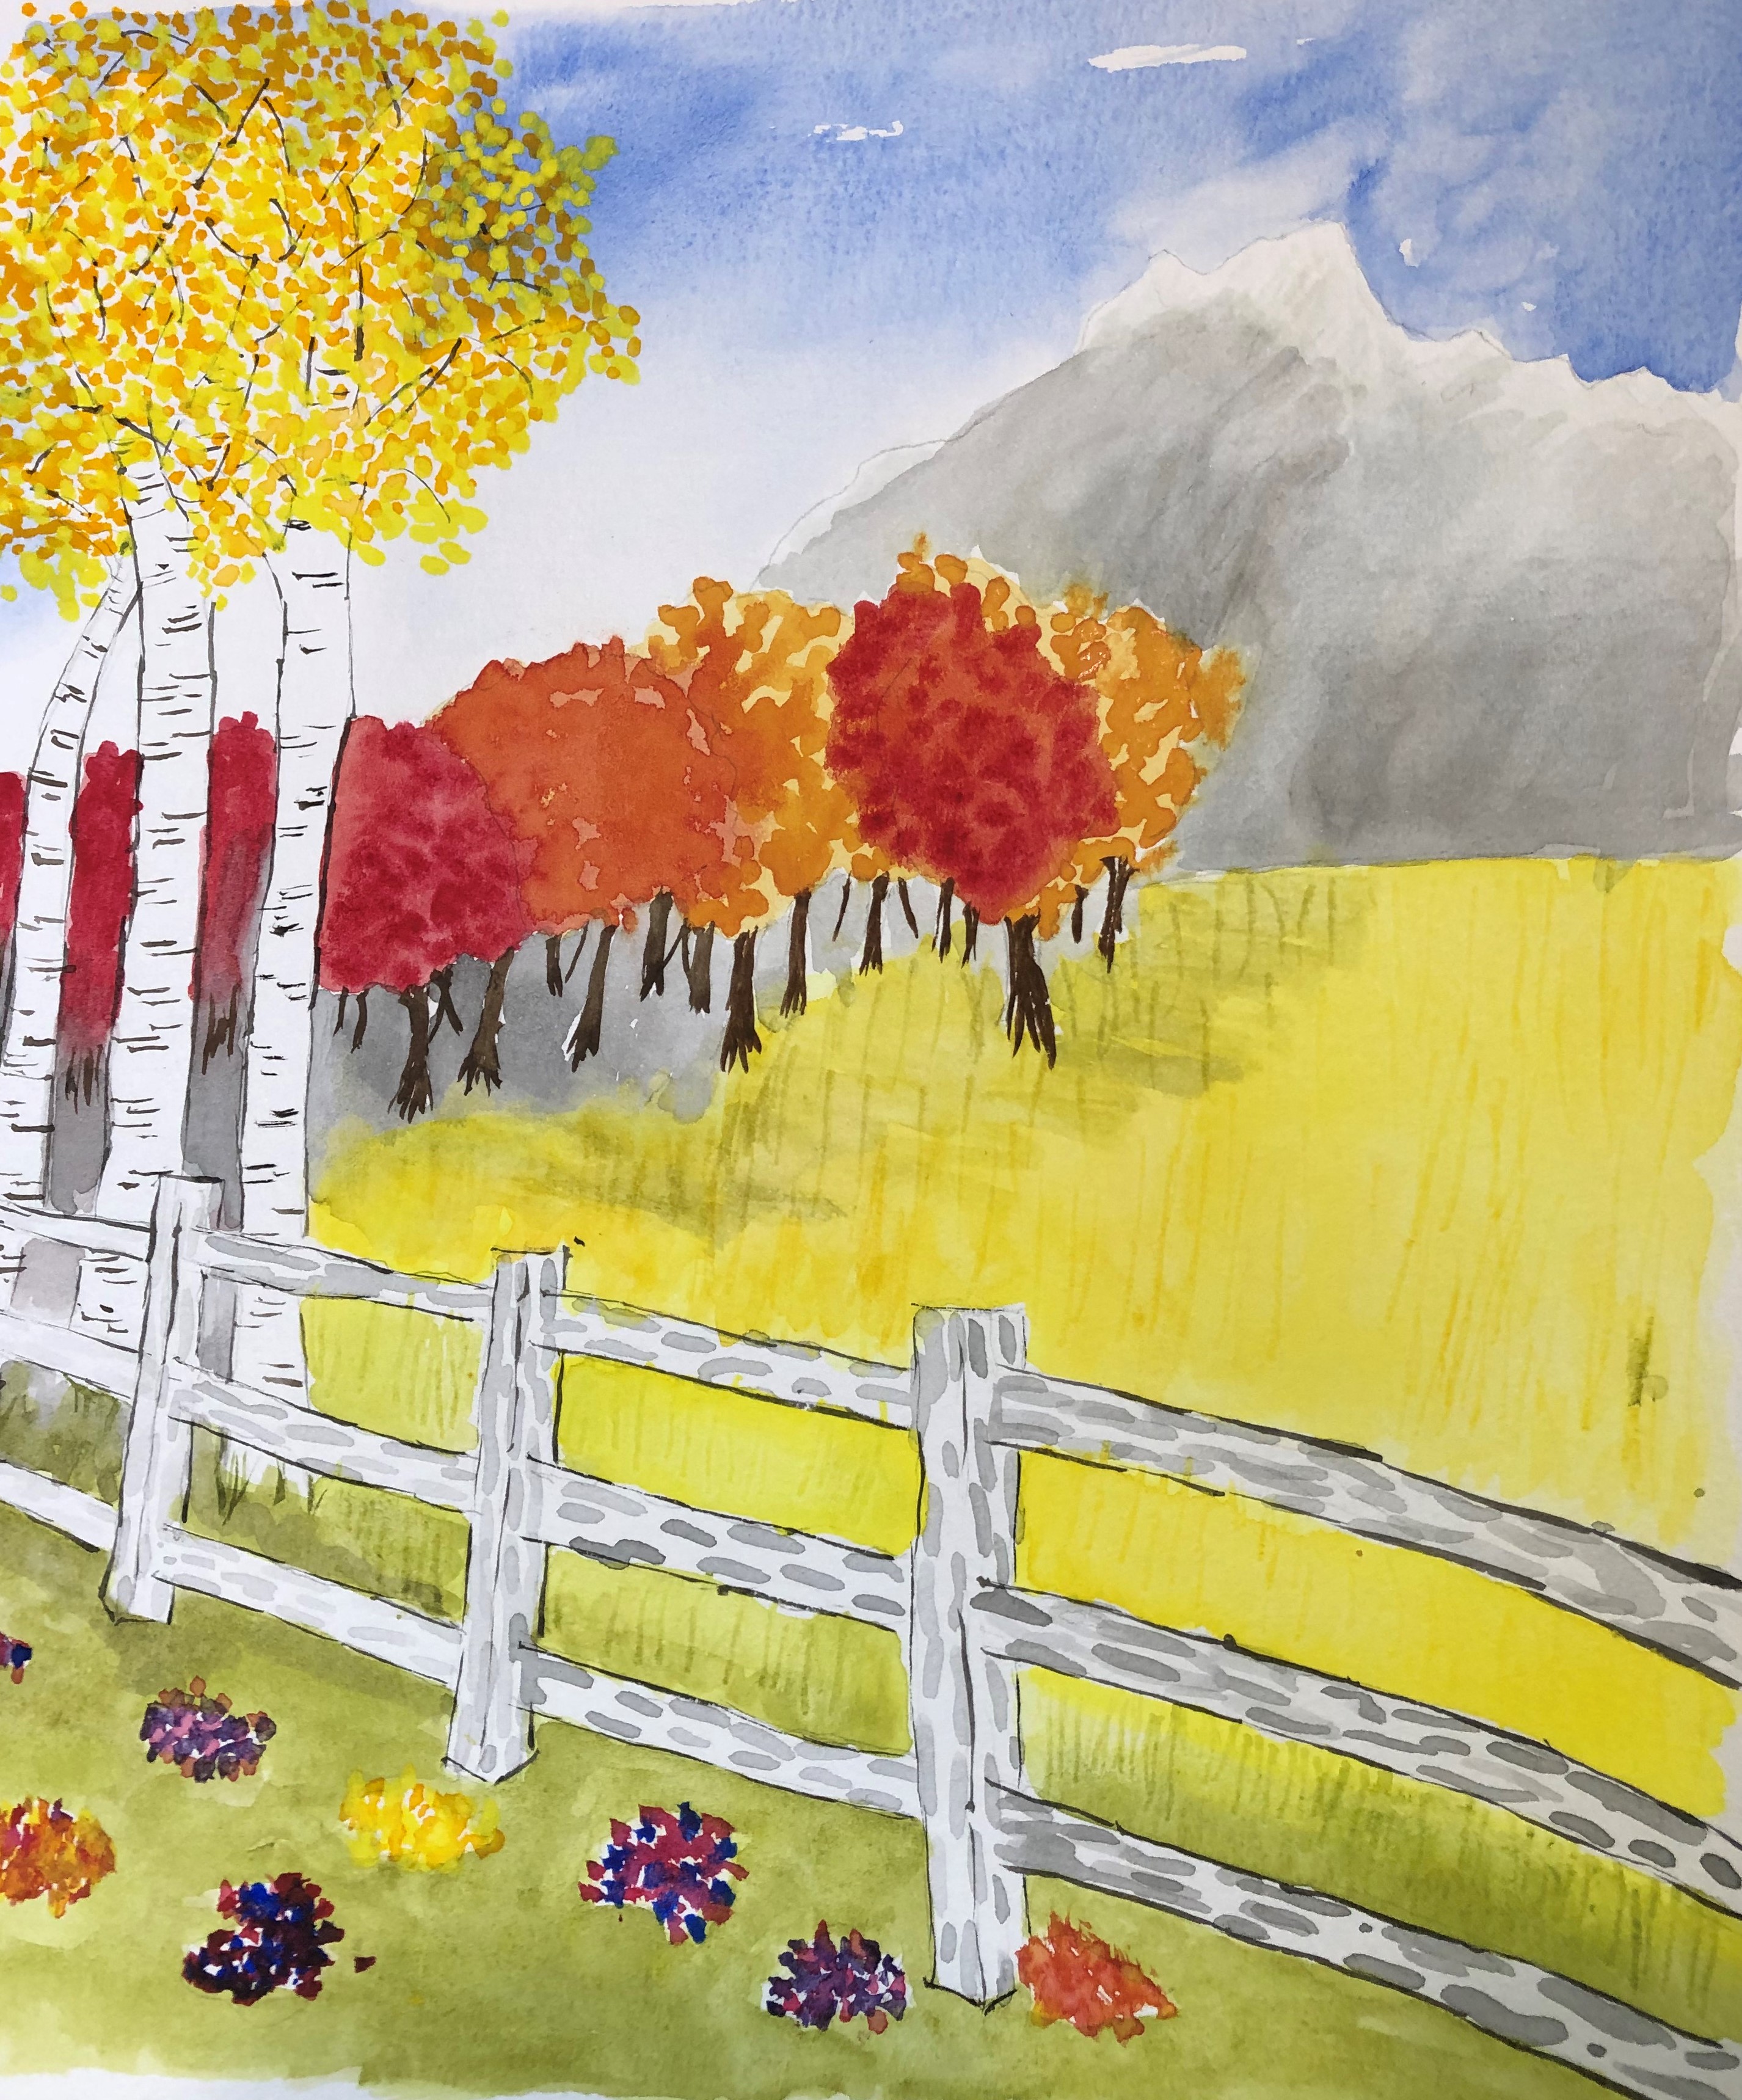 Watercolor painting of pasture with fence, skyline, and fall trees.